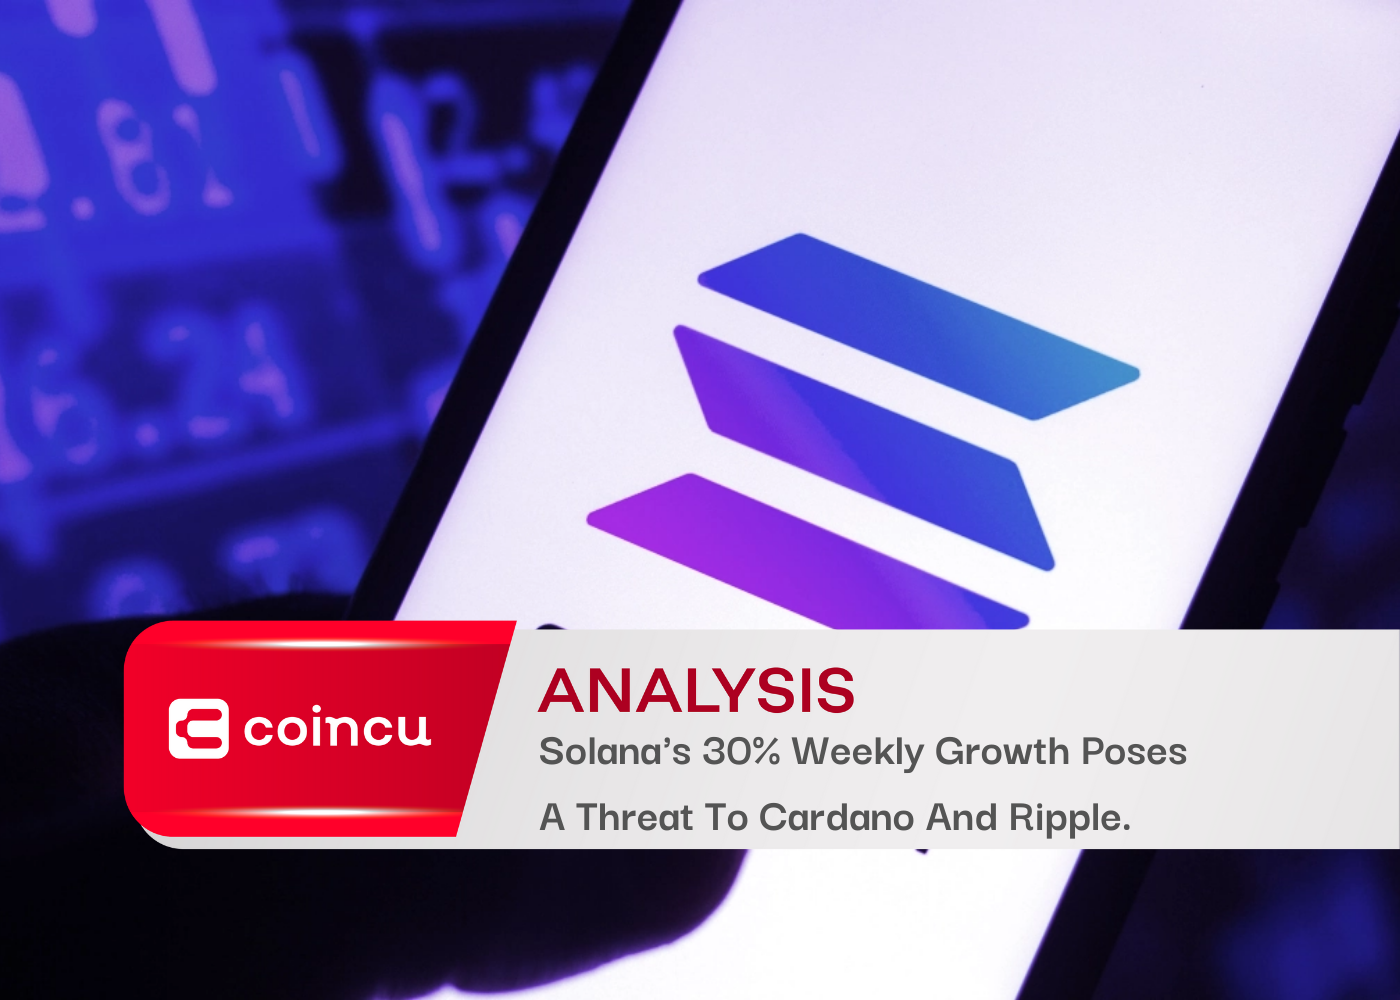 Solana’s 30% Weekly Growth Poses A Threat To Cardano And Ripple.